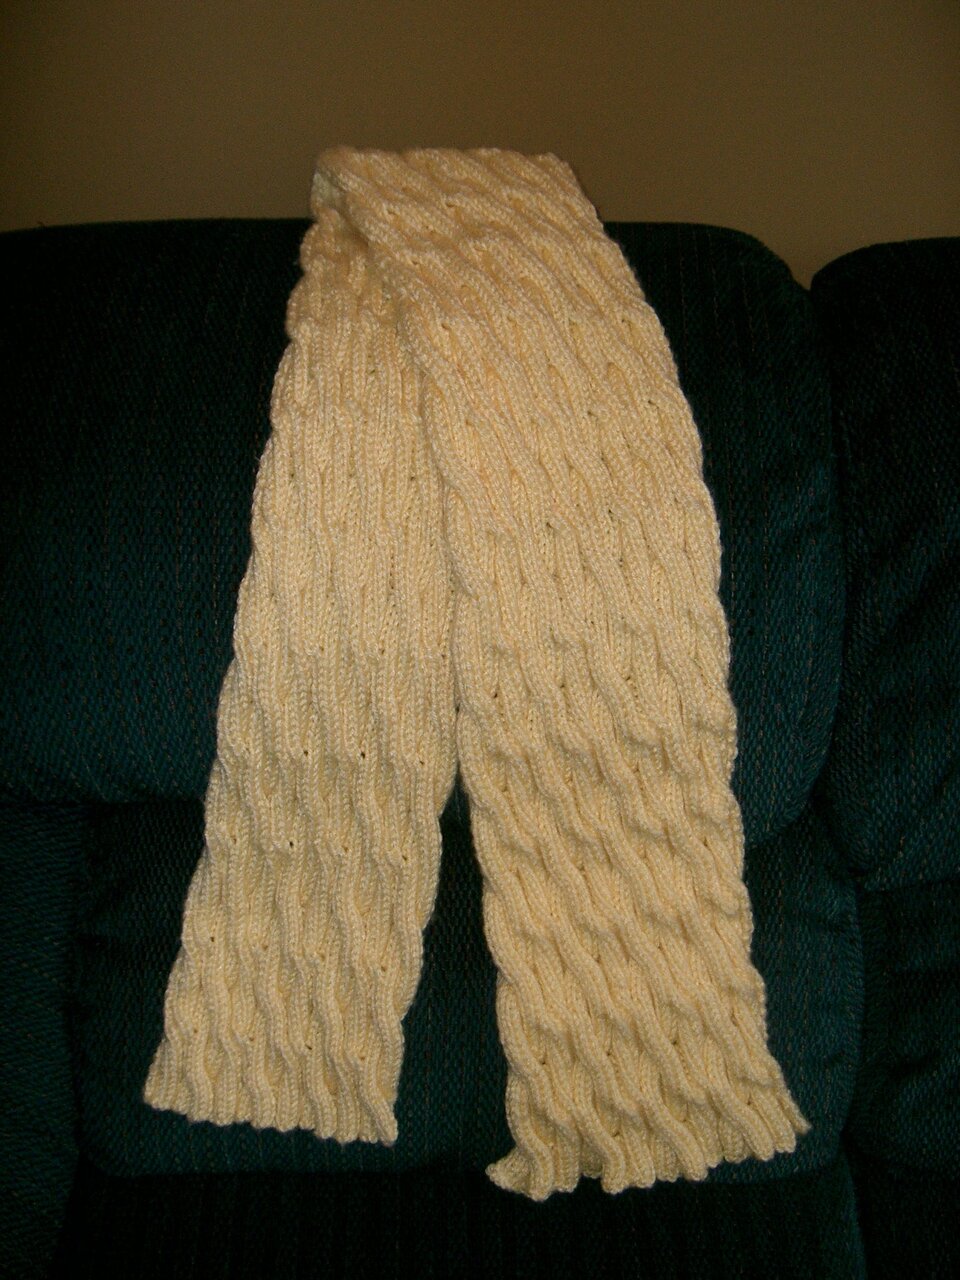 Photo of the completed scarf showing of the fun cable design.